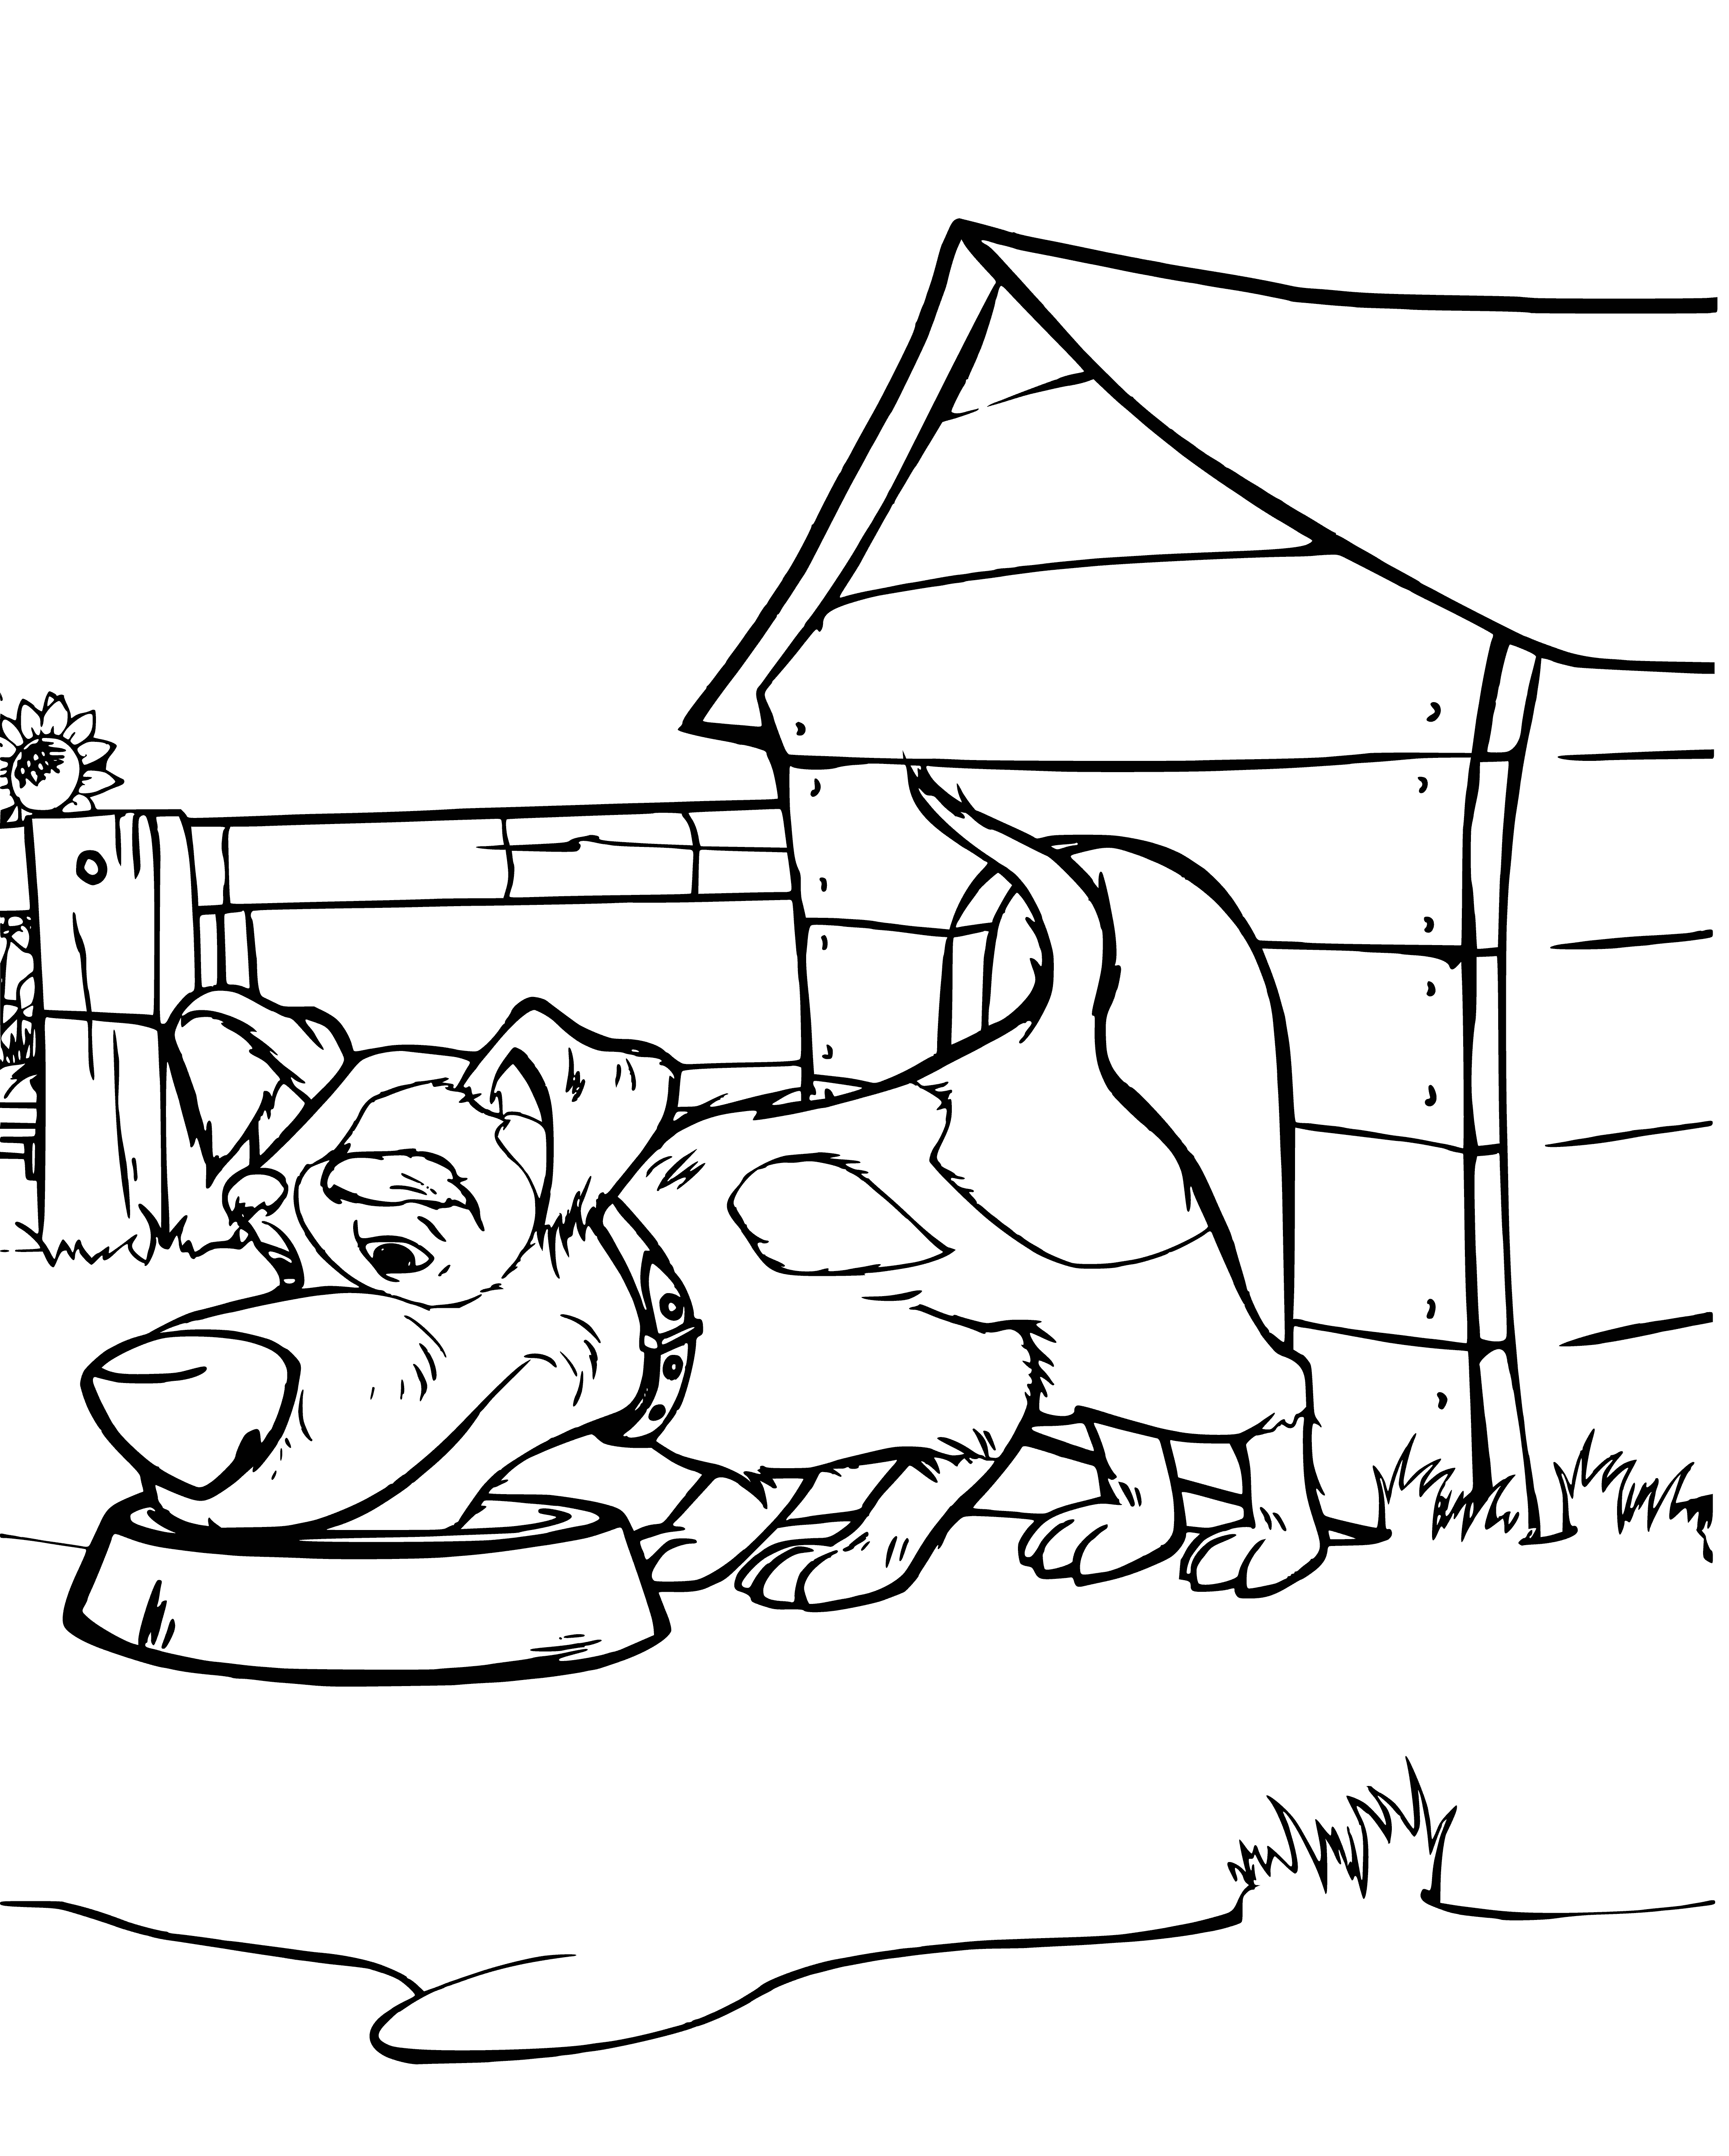 coloring page: Masha is a little girl petting a small black and white puppy. She has blonde hair, a red dress and red scarf. The pup is in a kennel and nearby is a big brown bear wearing a blue scarf.